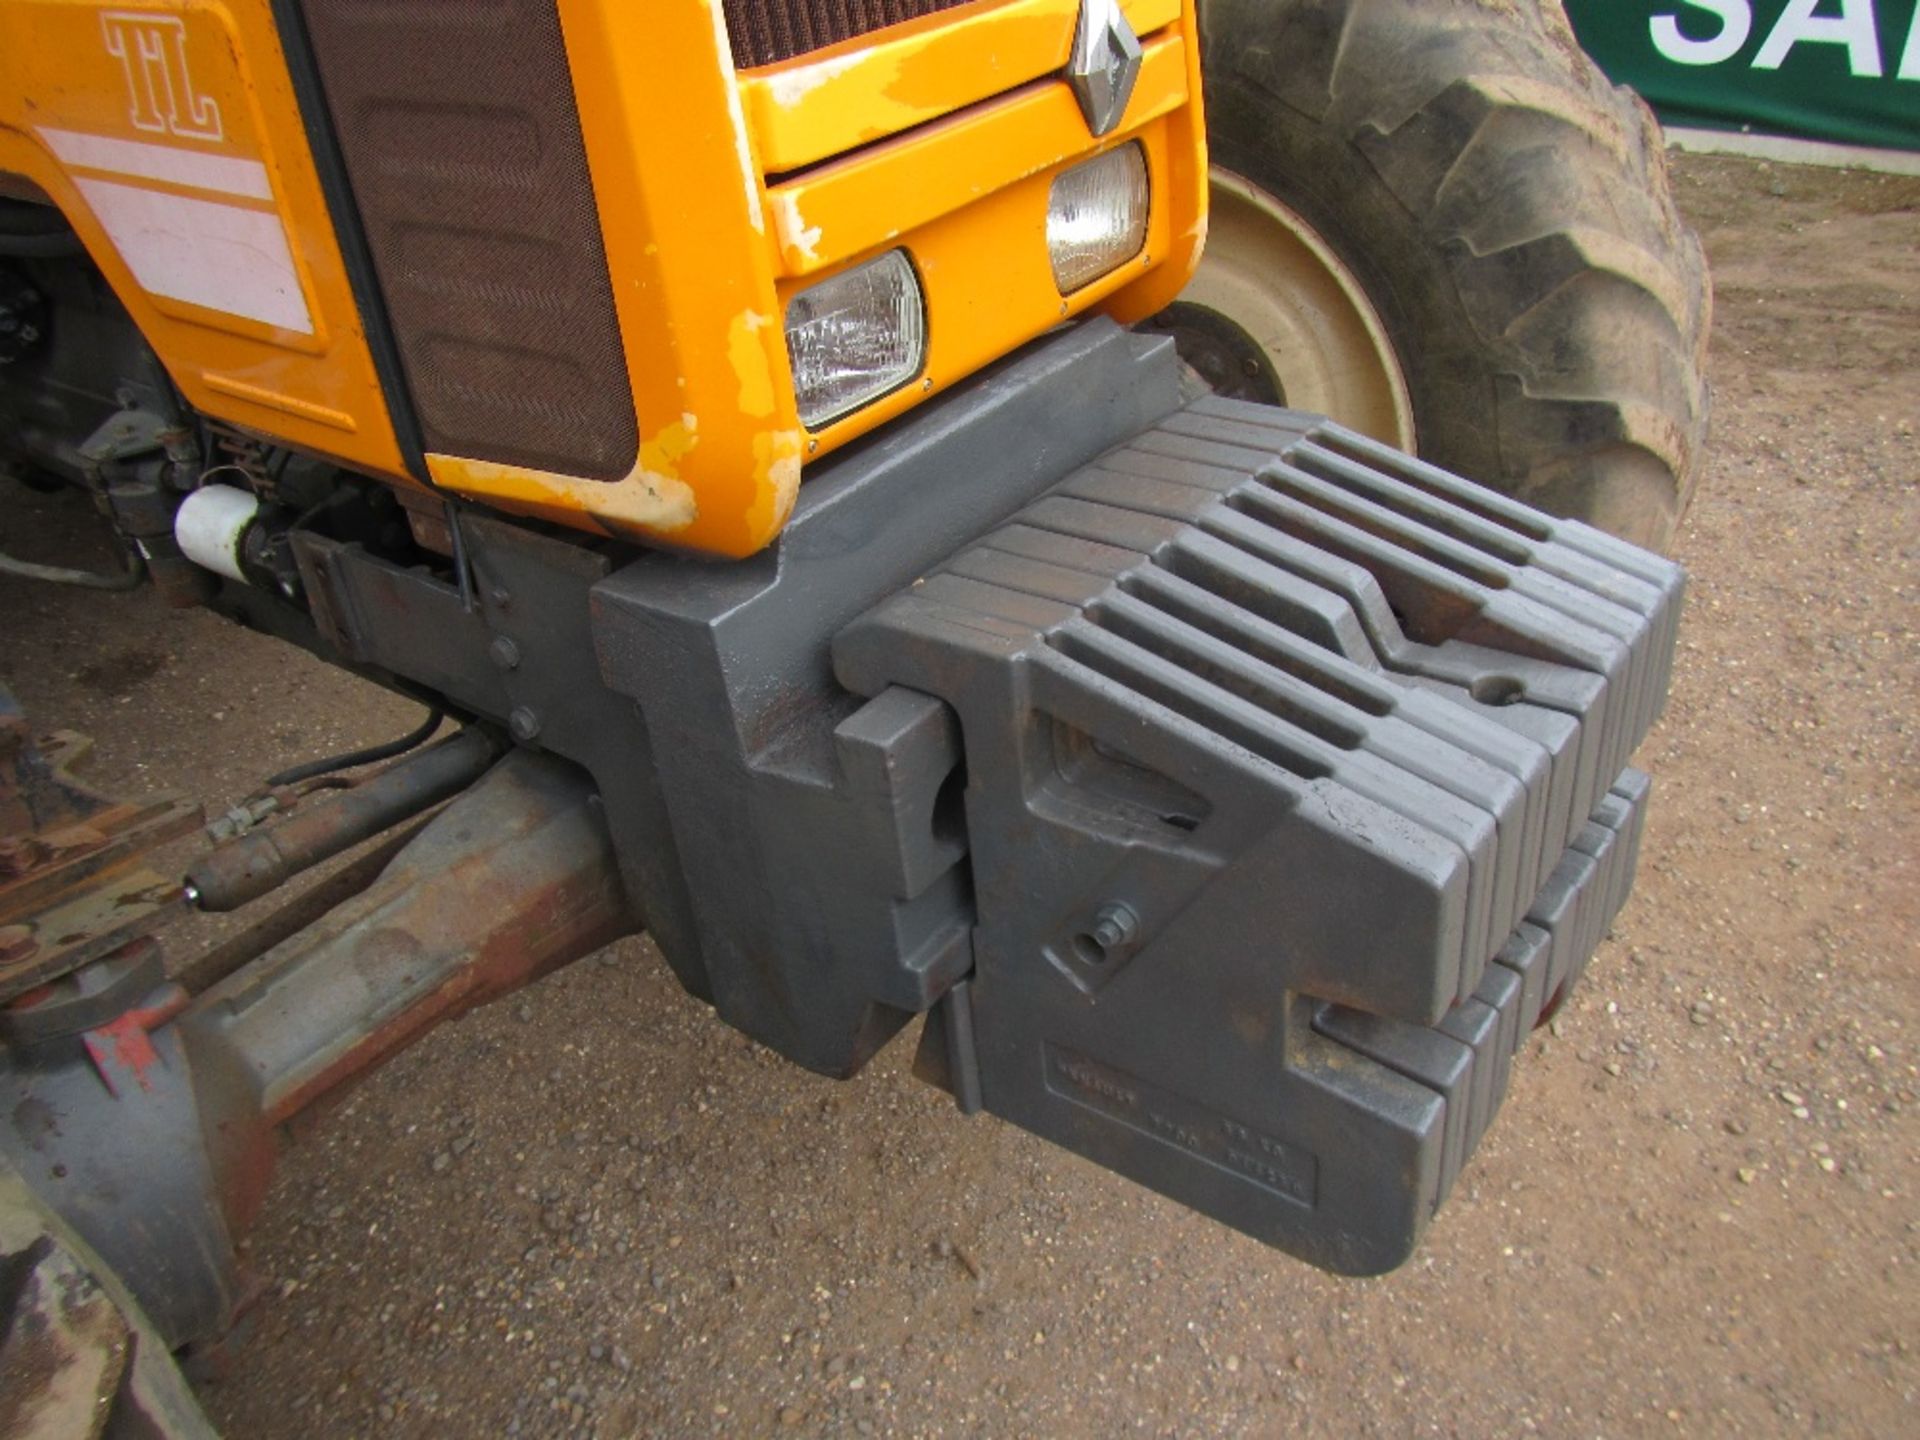 Renault 106-54 TL 4wd Tractor c/w 40k transmission, front weights Reg. No. M895 HSE - Image 4 of 18